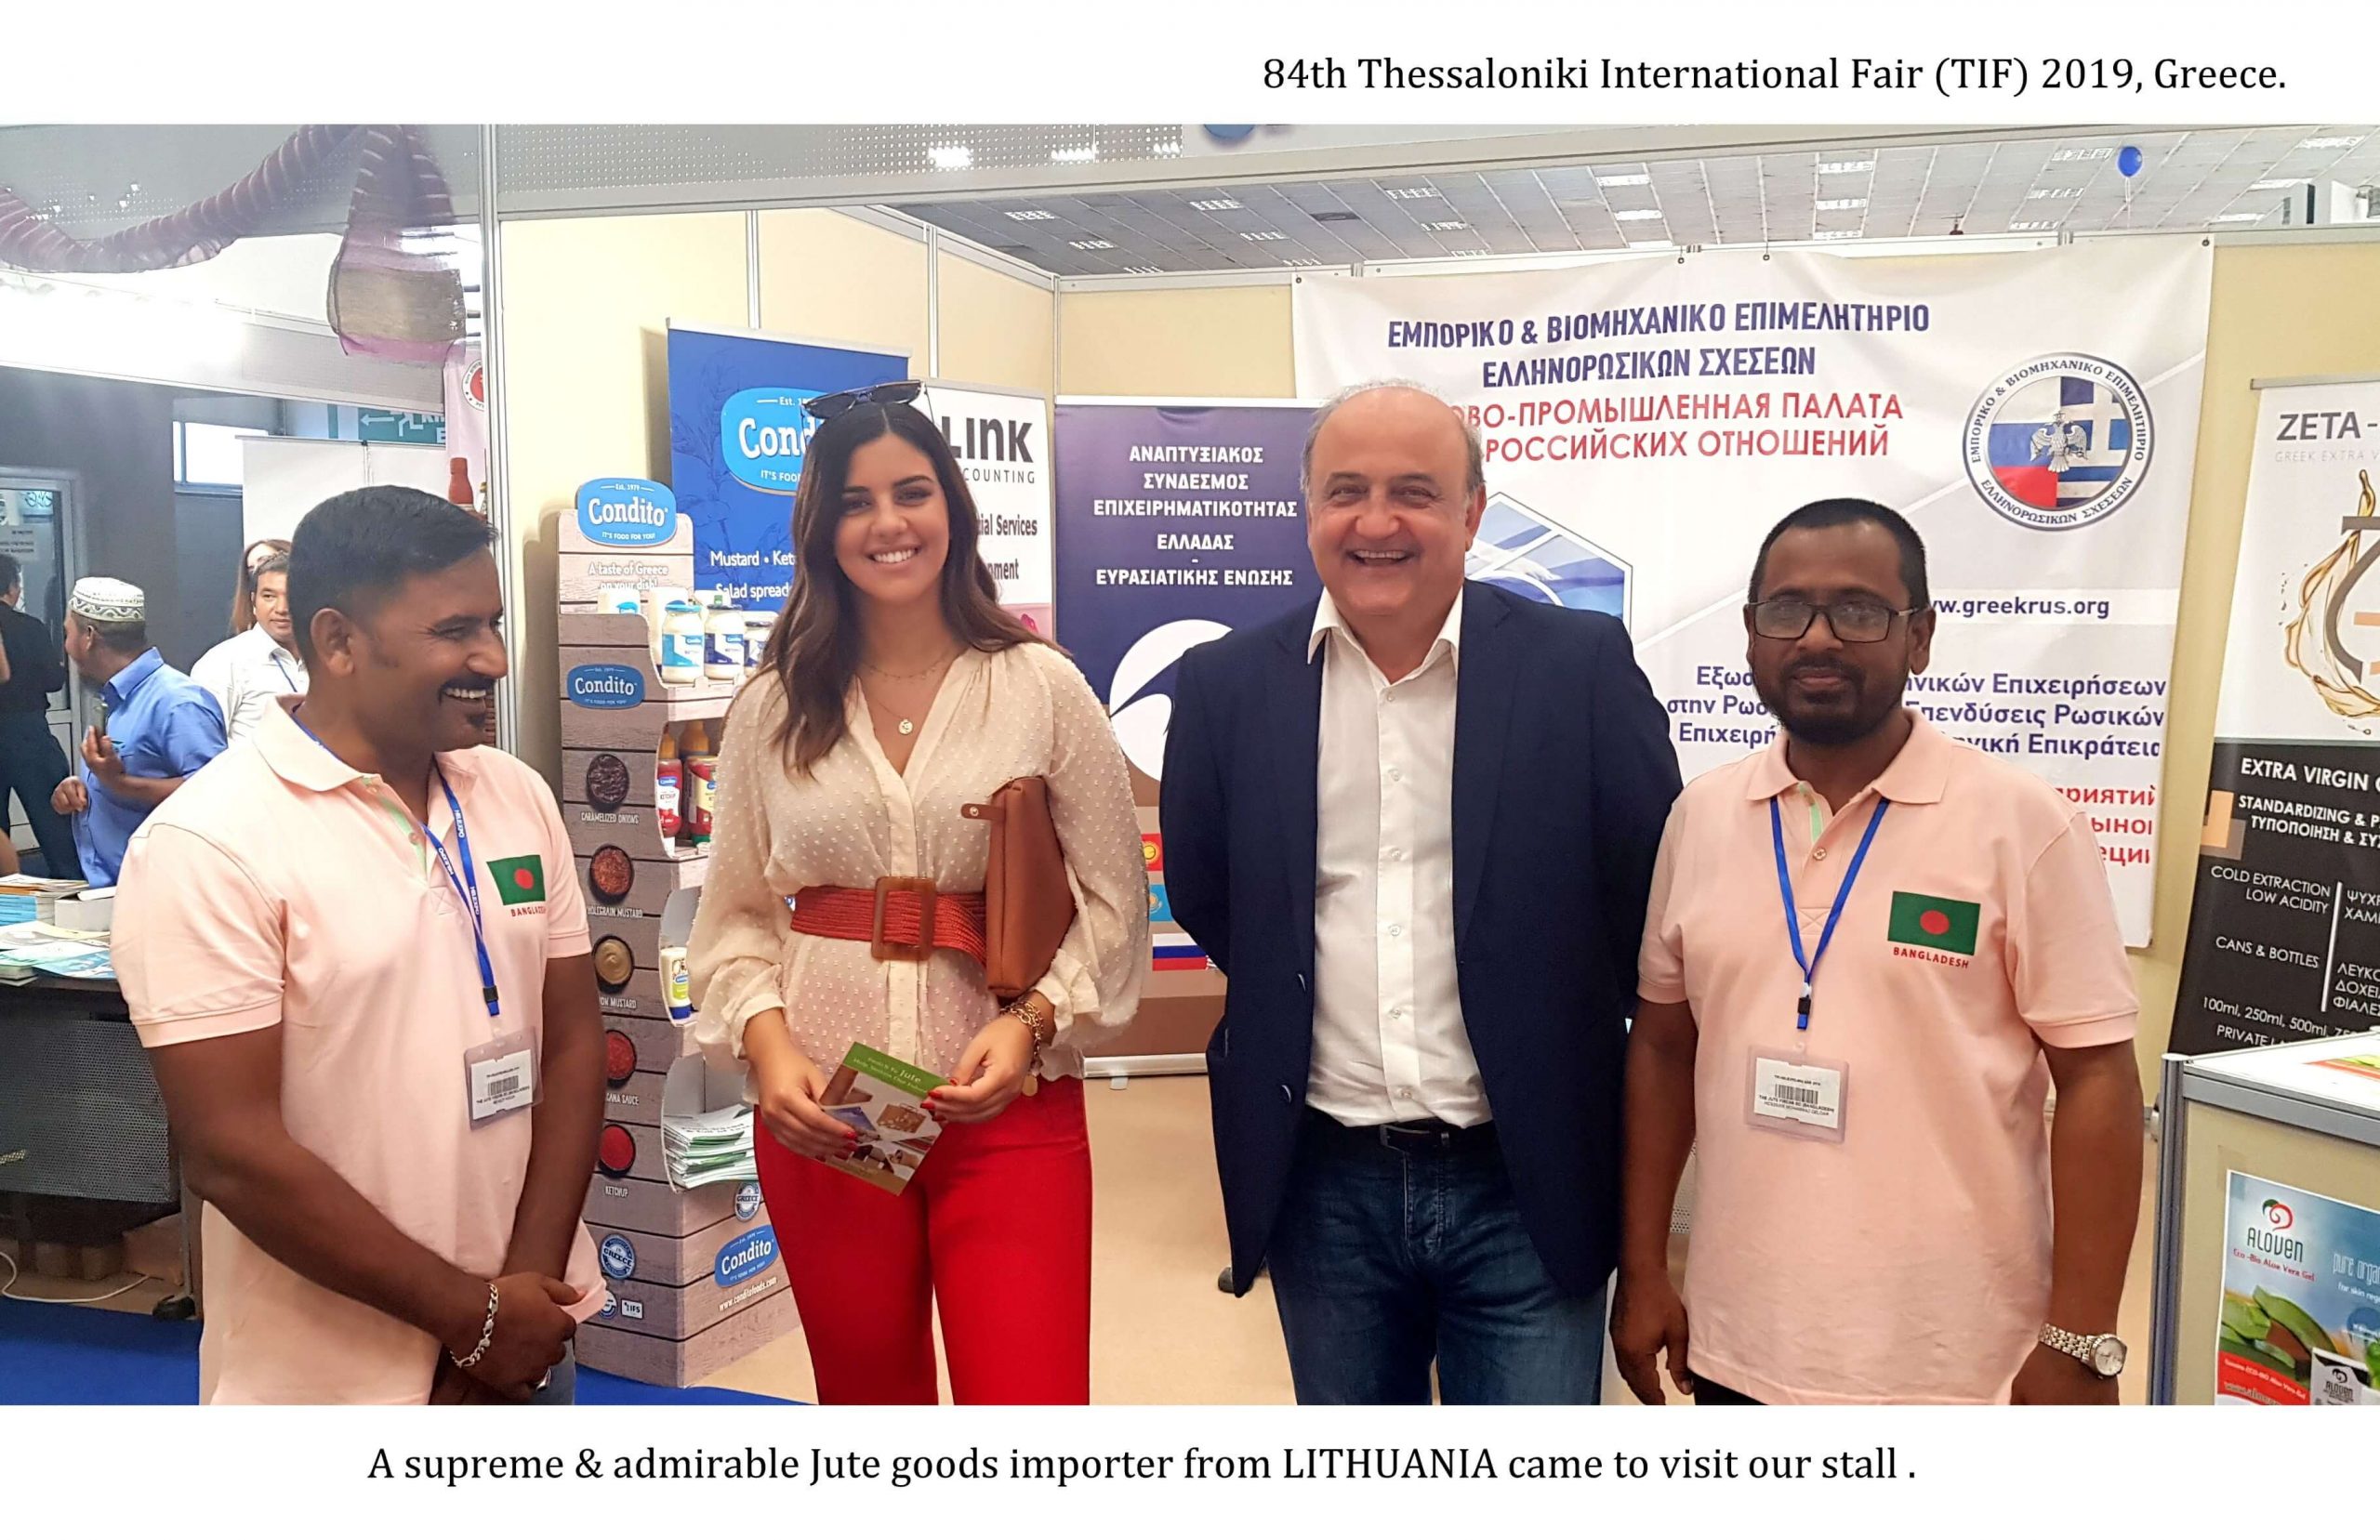 26.A supreme & admirable Jute goods importer from LITHUANIA came to visit our stall at Thessolaniki International Trade fair 2019, Greece